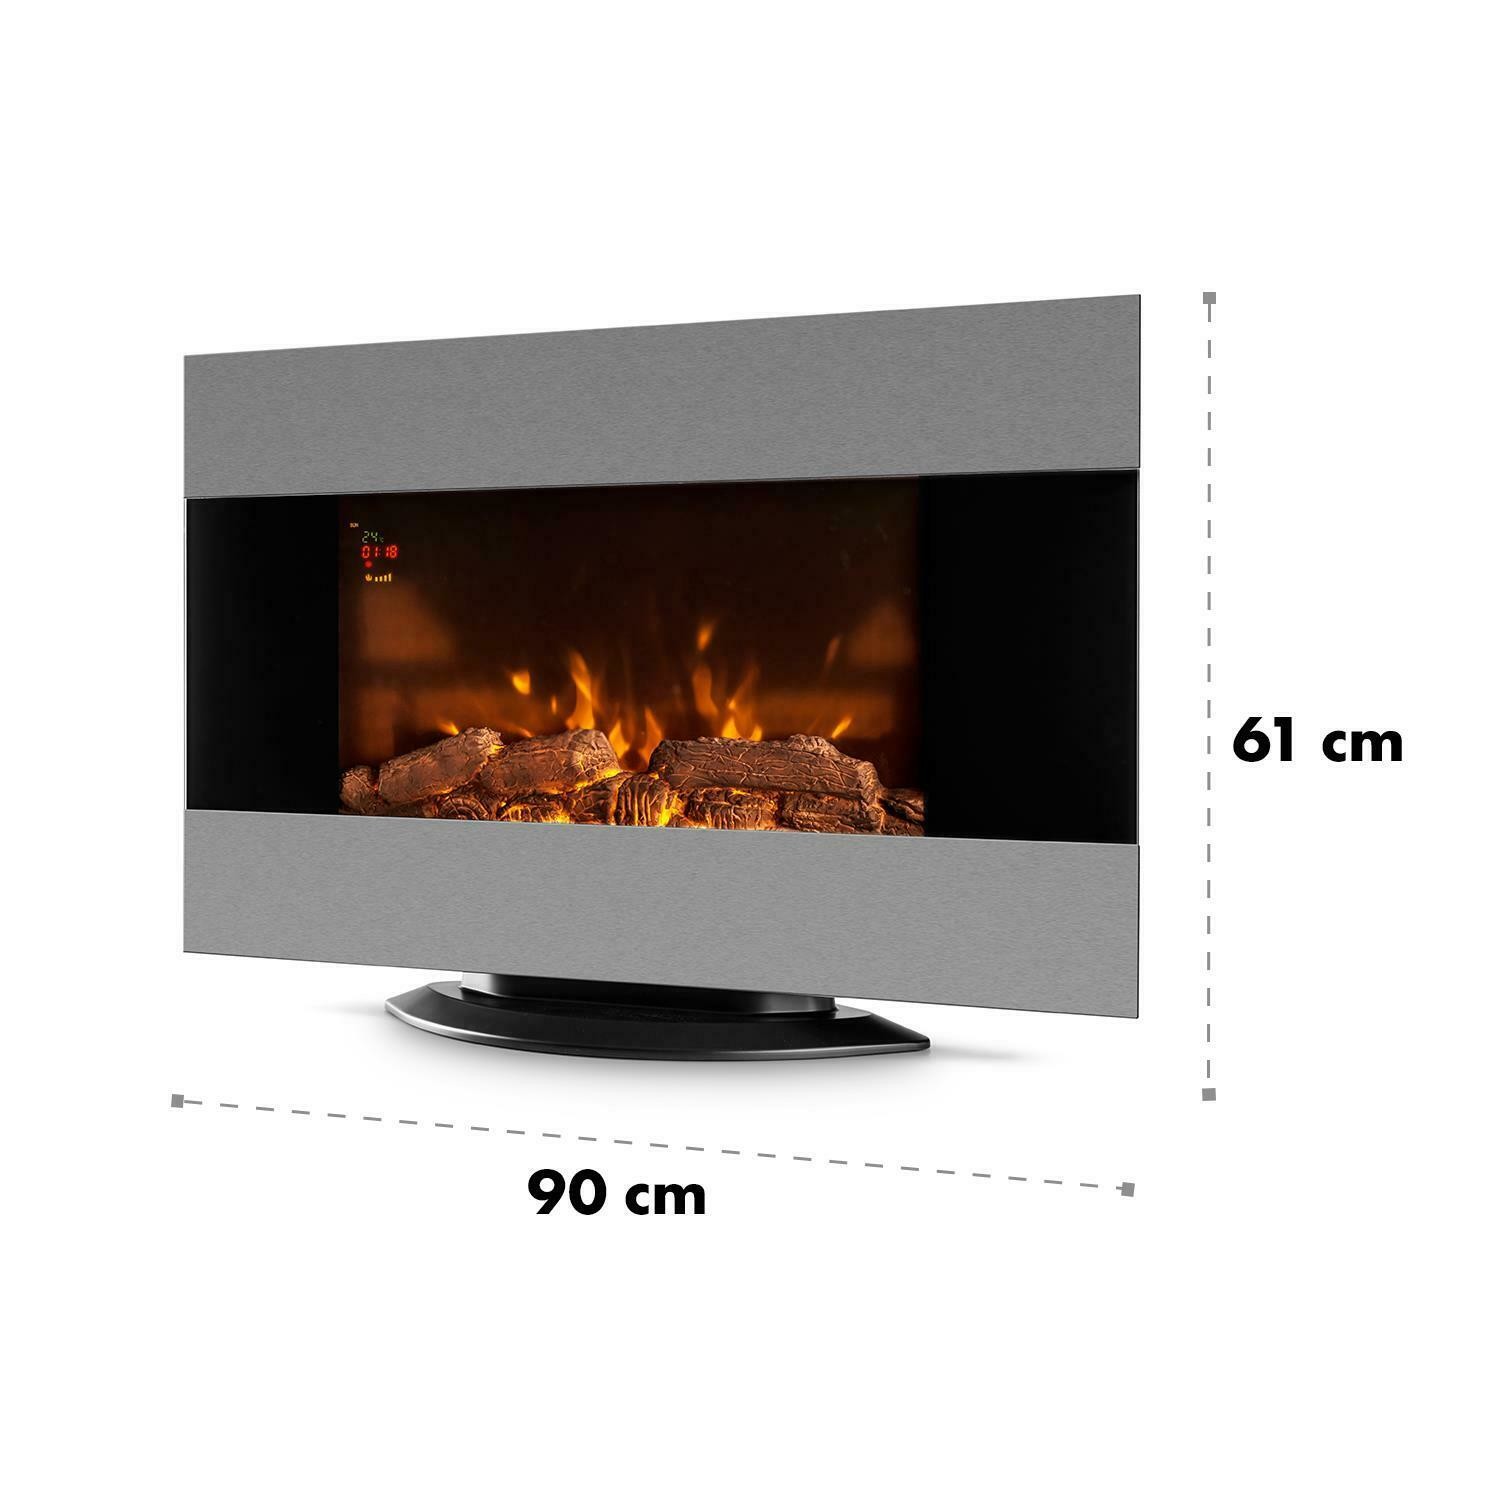 Tv and Fire Wall Awesome Efp Approved Wall Mounted Electric Fireplace Heater Ef420slb